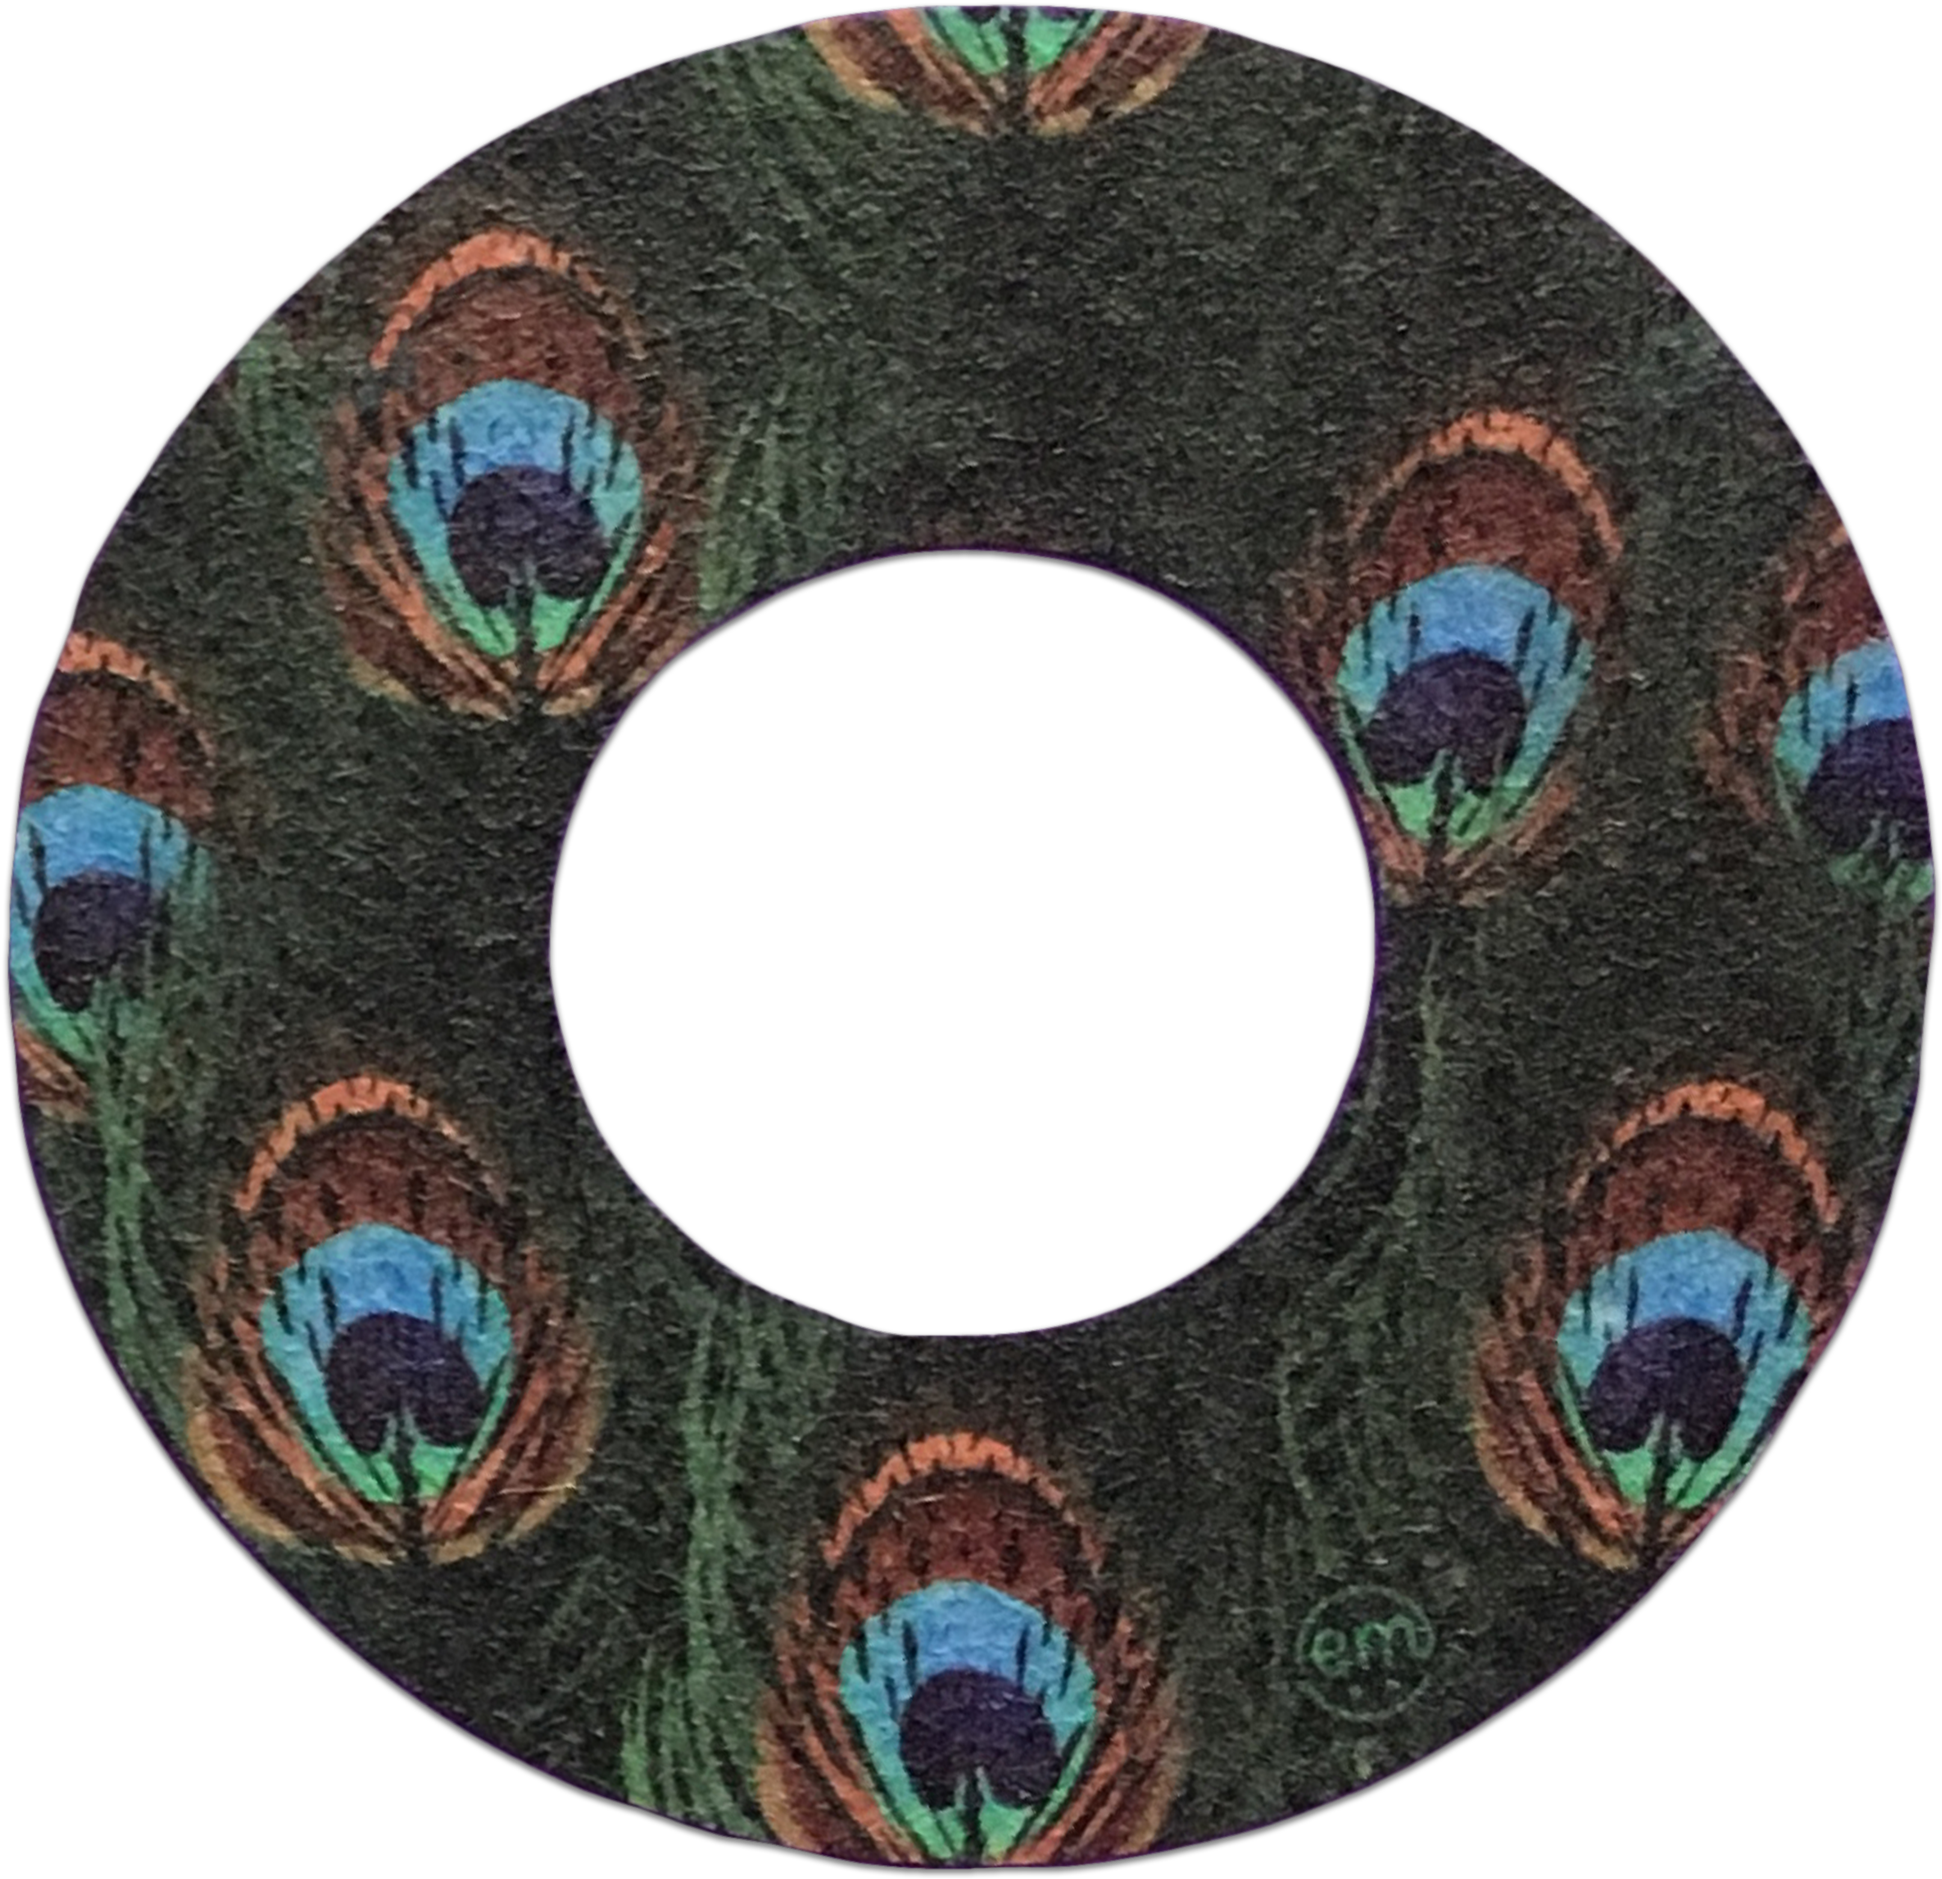 A Circular Object With Peacock Feathers